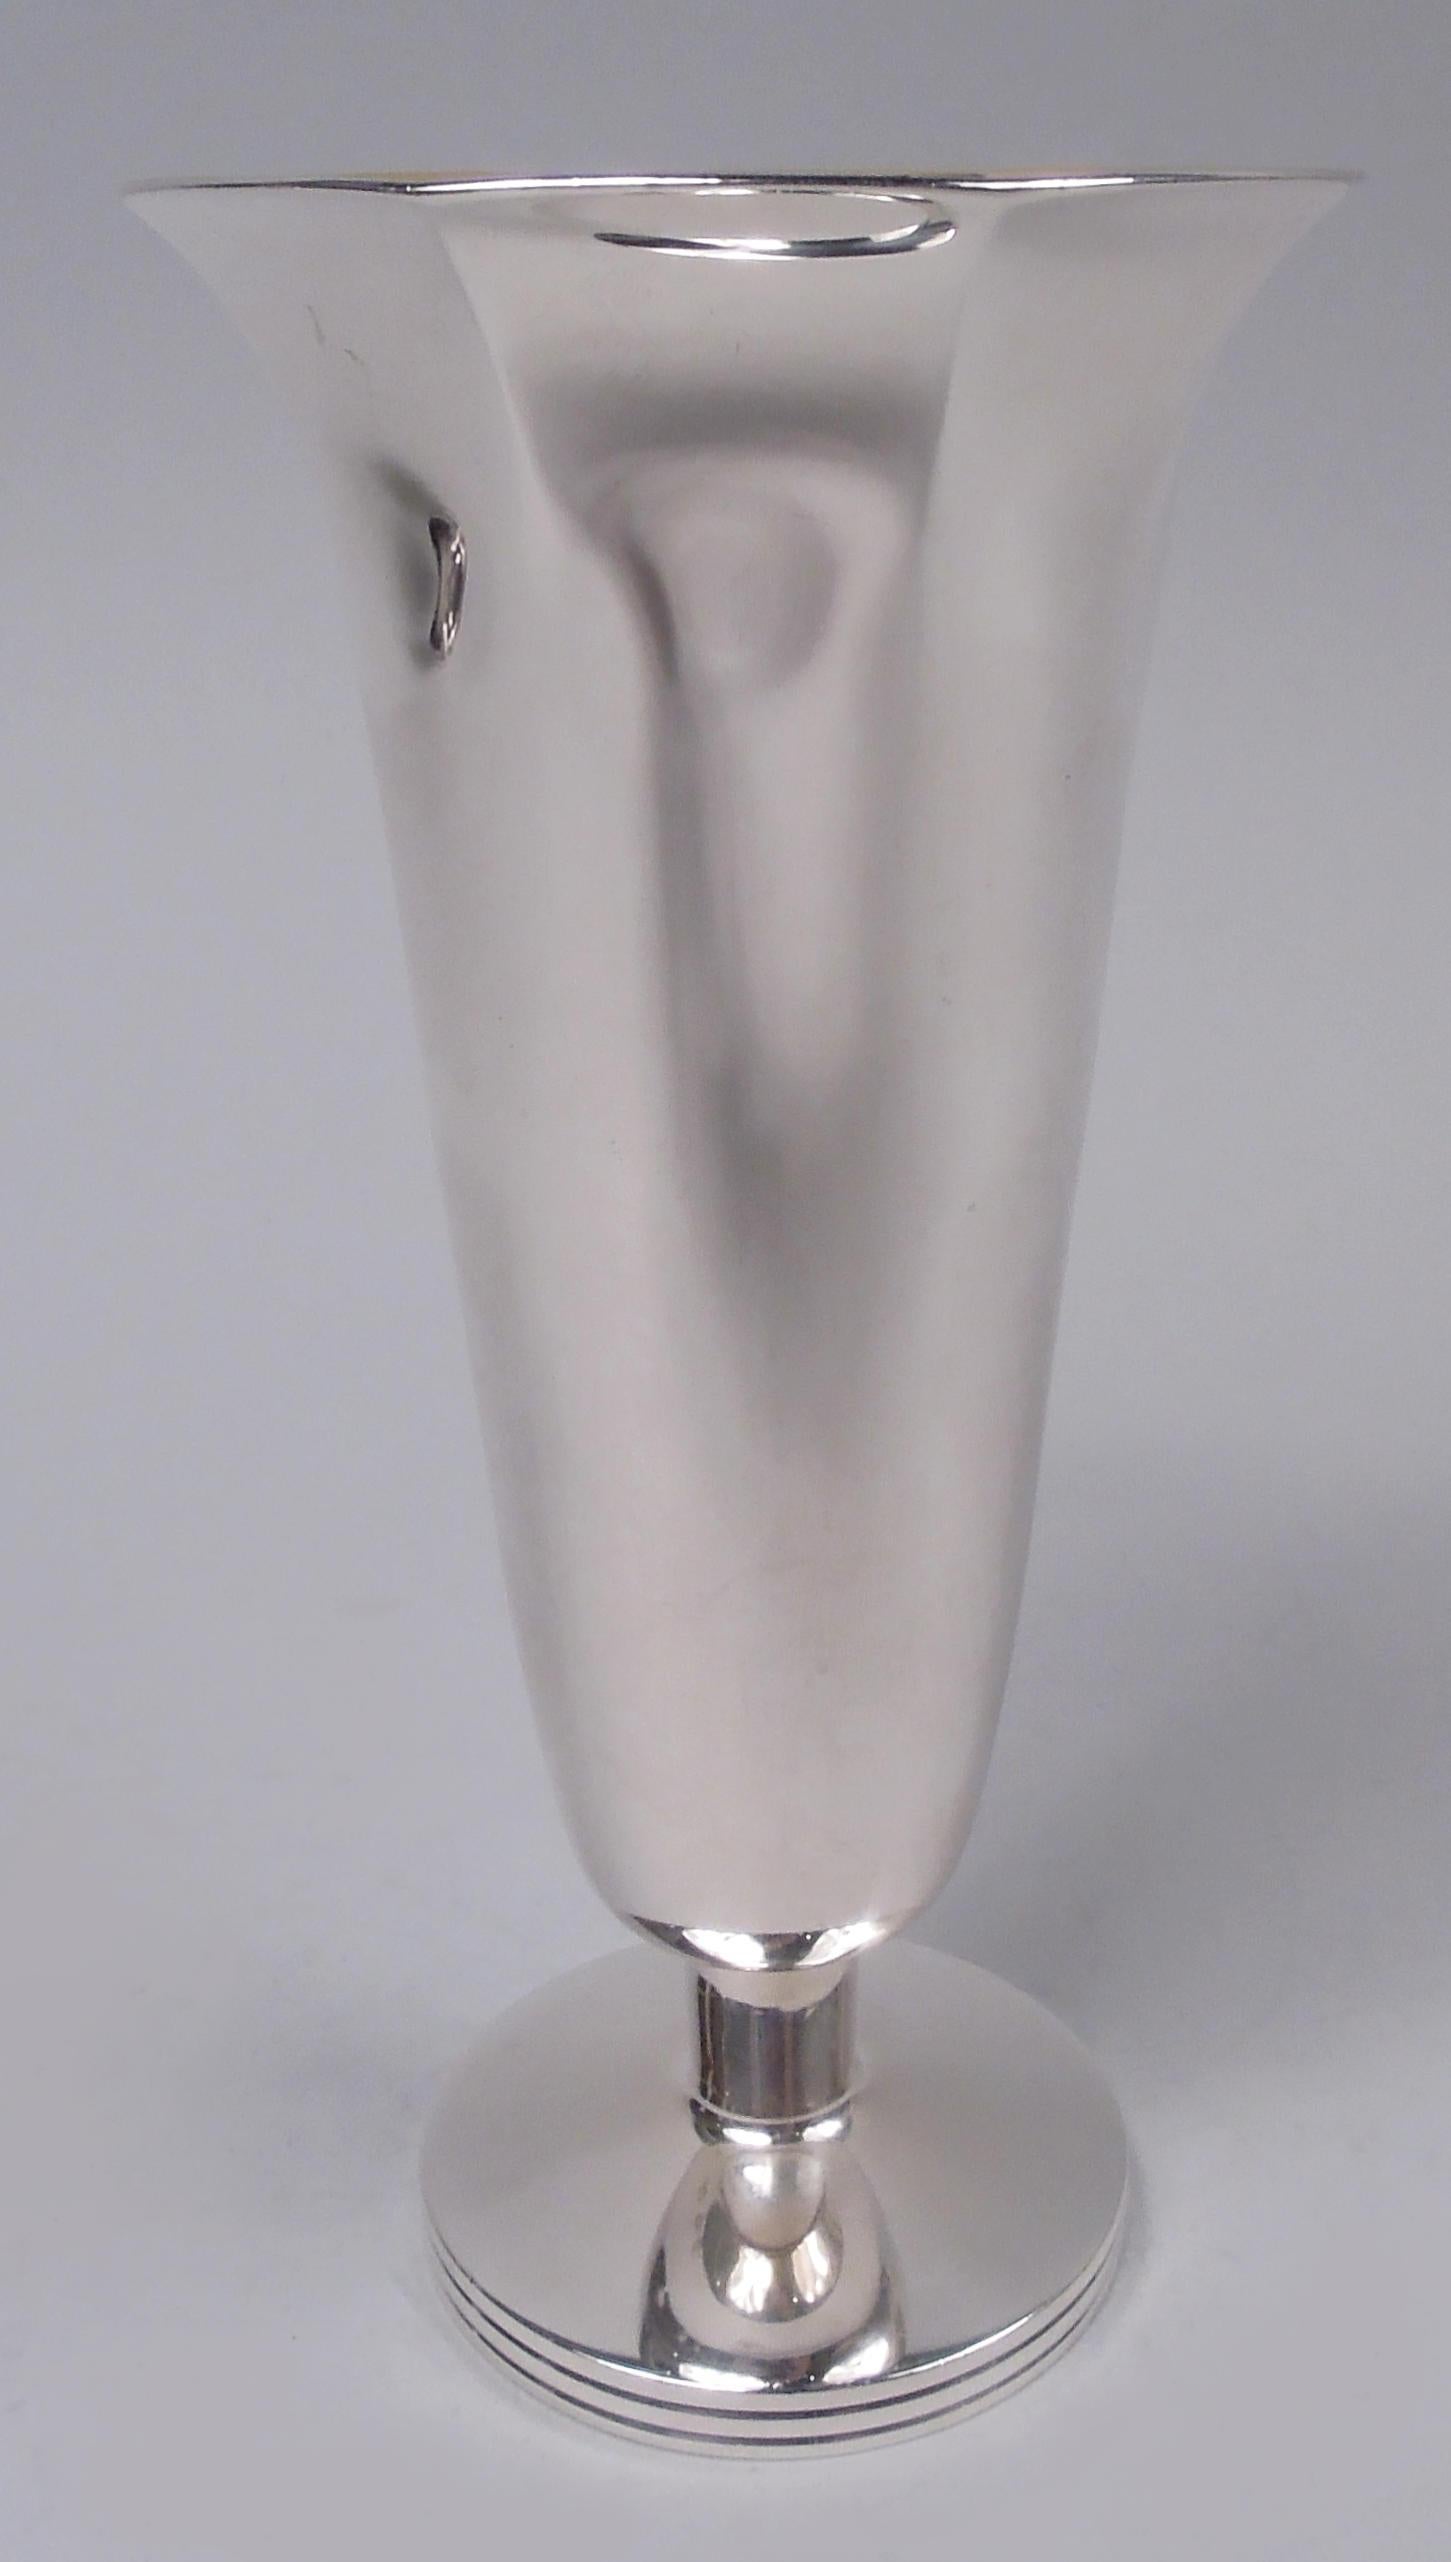 Modern Classical sterling silver vase. Made by Sotirio Bulgari in London in 1989. Tapering bowl with faceted and flared rim and gilt interior; short cylindrical stem and round foot with reeded rim. Fully marked including maker’s and retailer’s